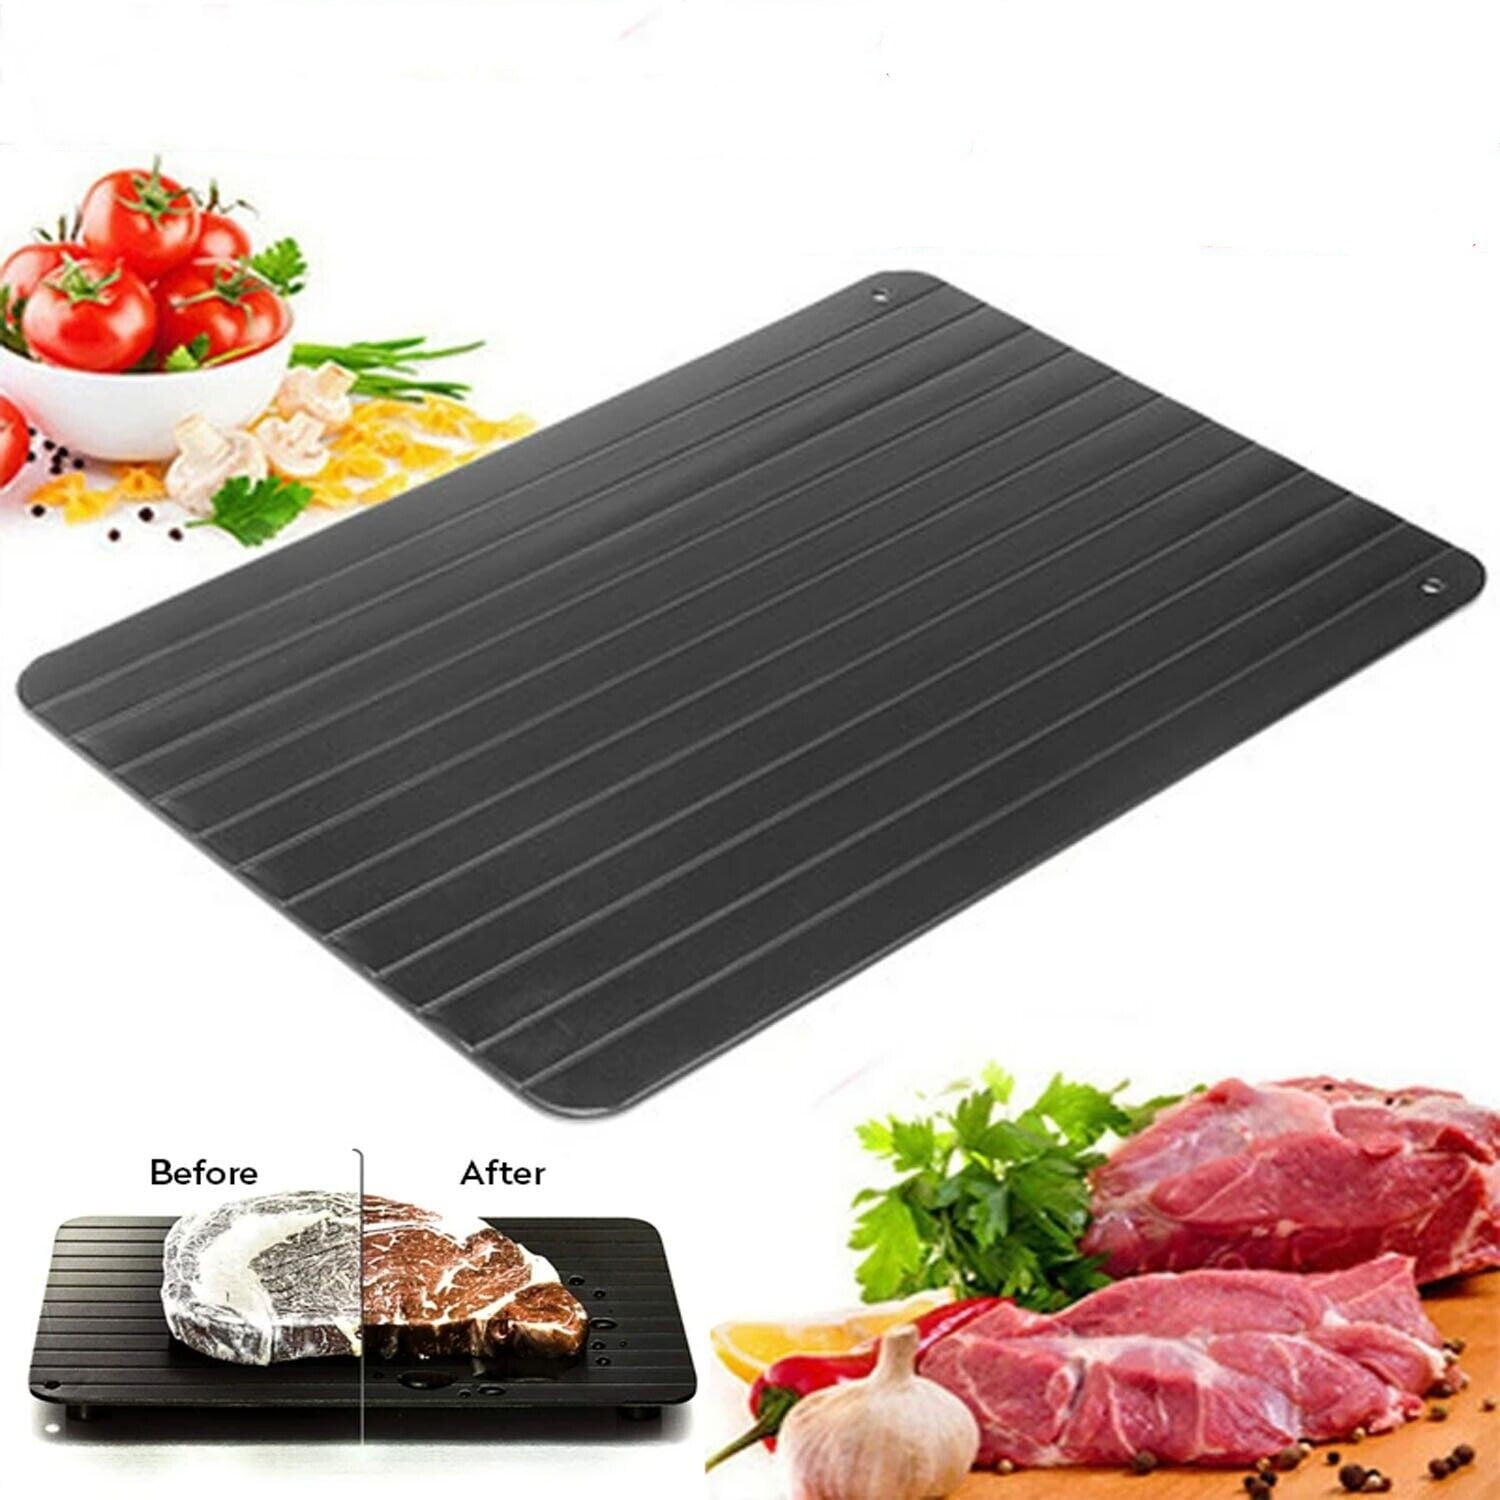 Defrosting Tray, Rapid Thawing Plate for Frozen Meat, Quick and Safe Thaw Defrost Tray for Kitchen, Black